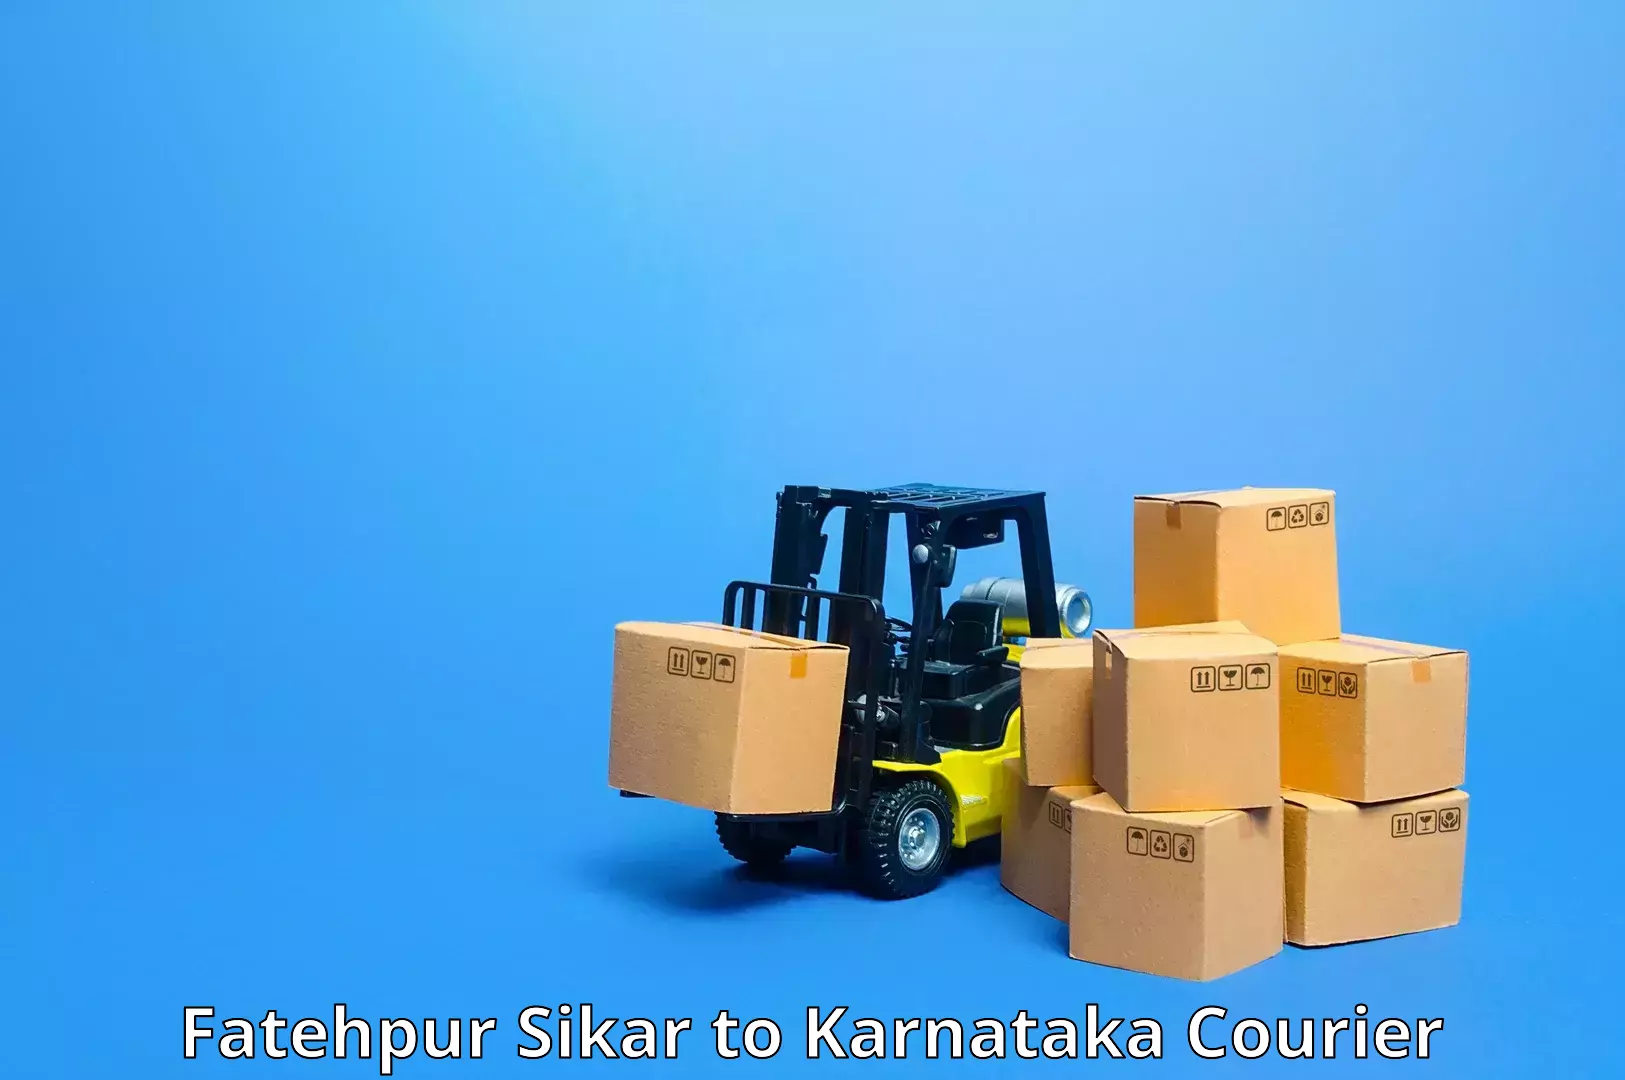 Global courier networks Fatehpur Sikar to Jagalur